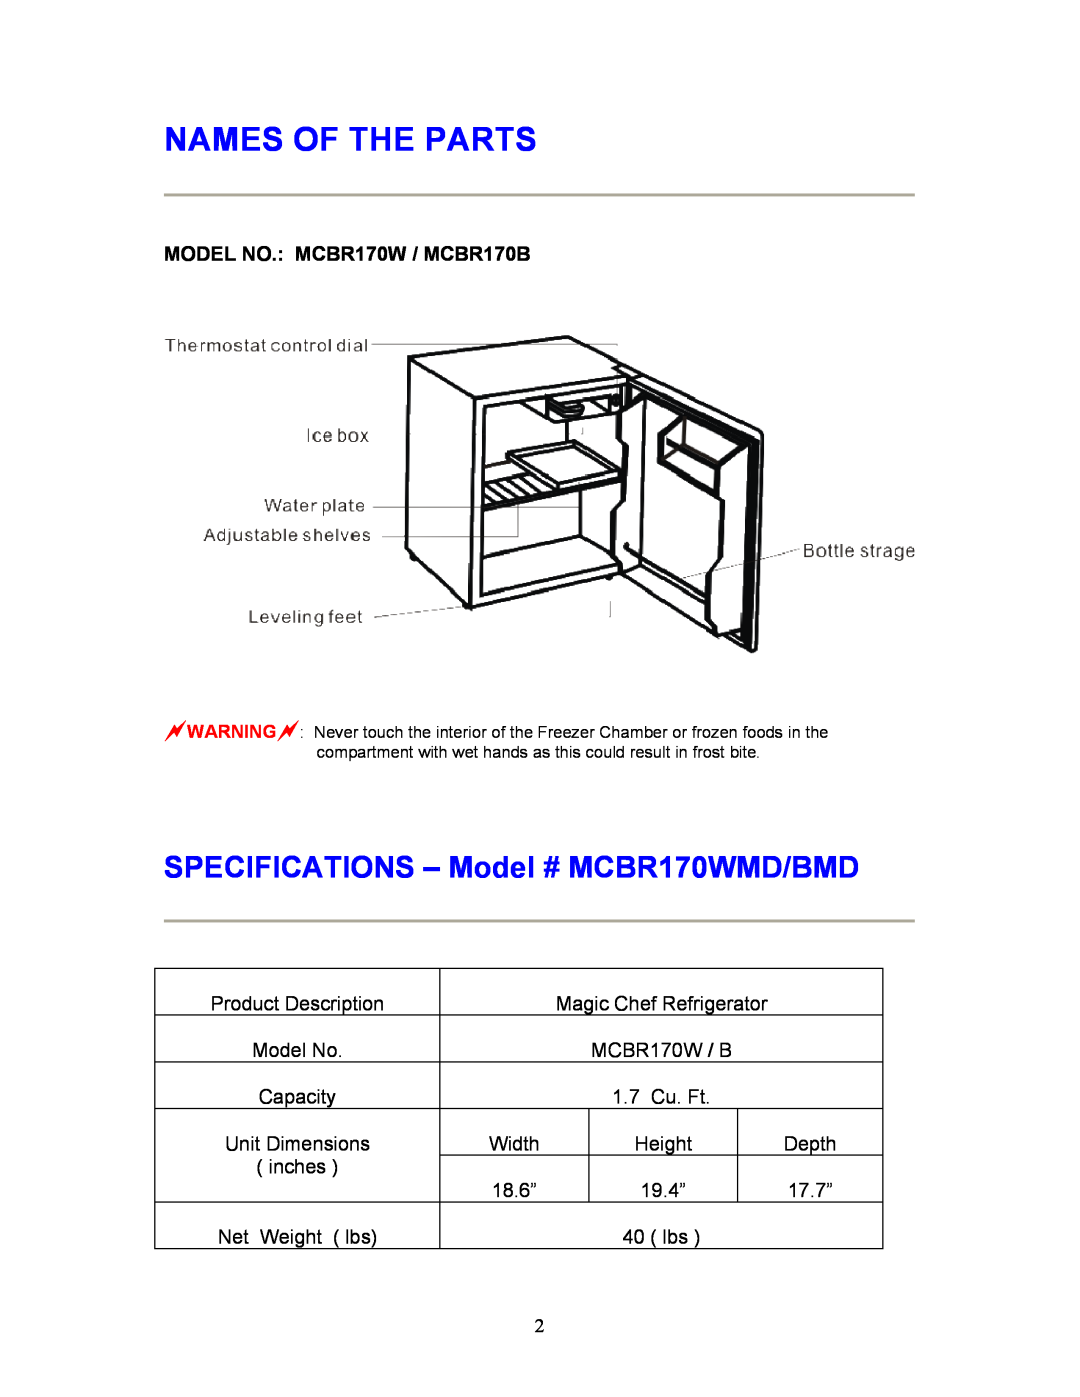 Magic Chef instruction manual Names Of The Parts, MODEL NO. MCBR170W / MCBR170B, SPECIFICATIONS - Model # MCBR170WMD/BMD 